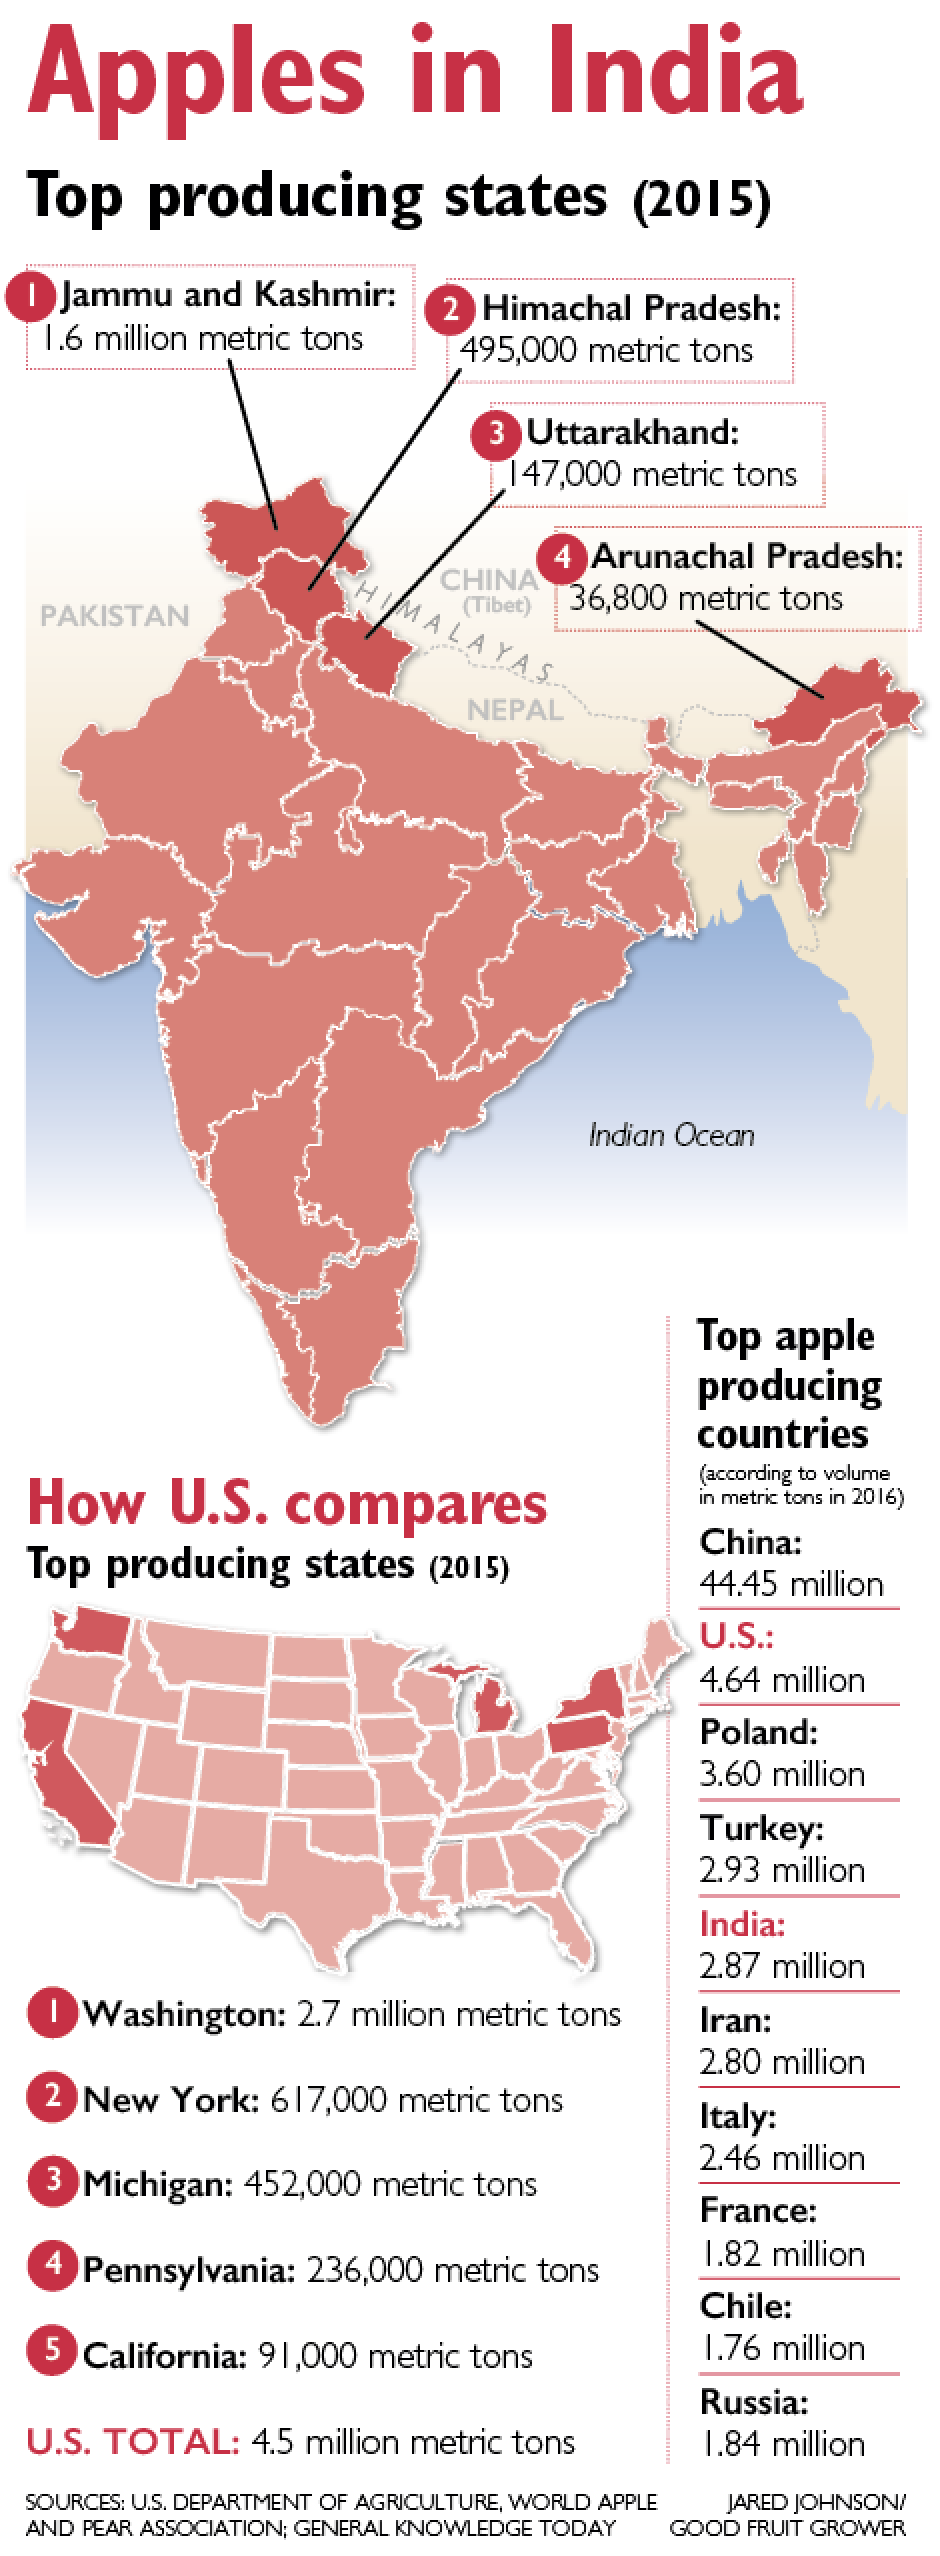 How U.S. compares. Top apple producing states and countries.